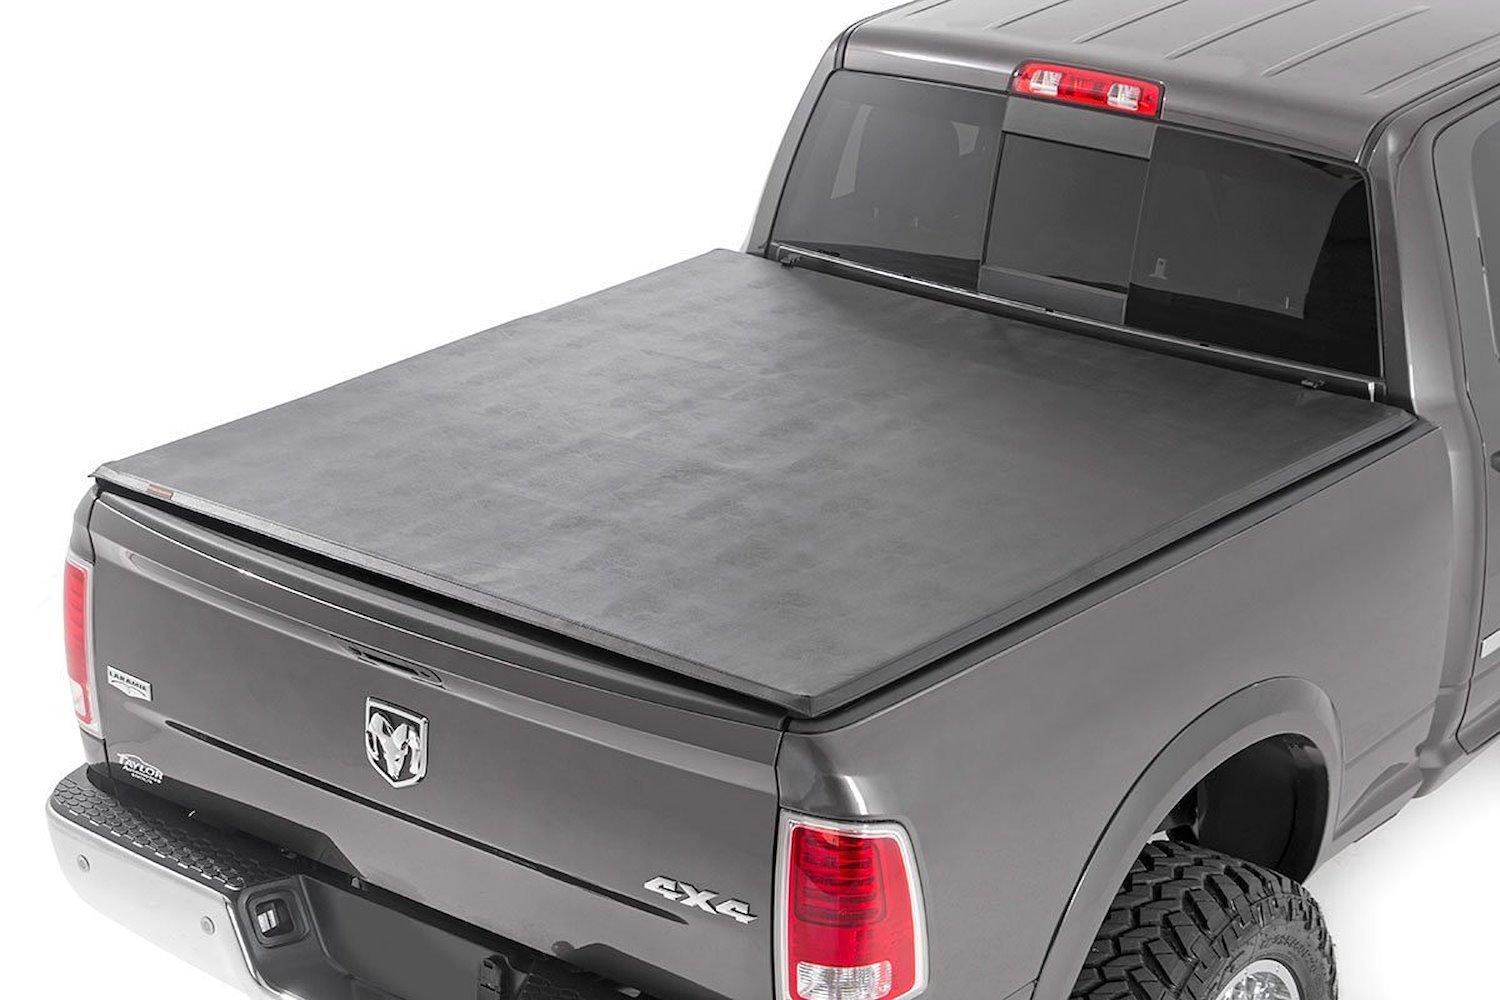 RC46319640 Dodge Soft Tri-Fold Bed Cover (09-18 Ram 1500 - 6' 4" Bed)